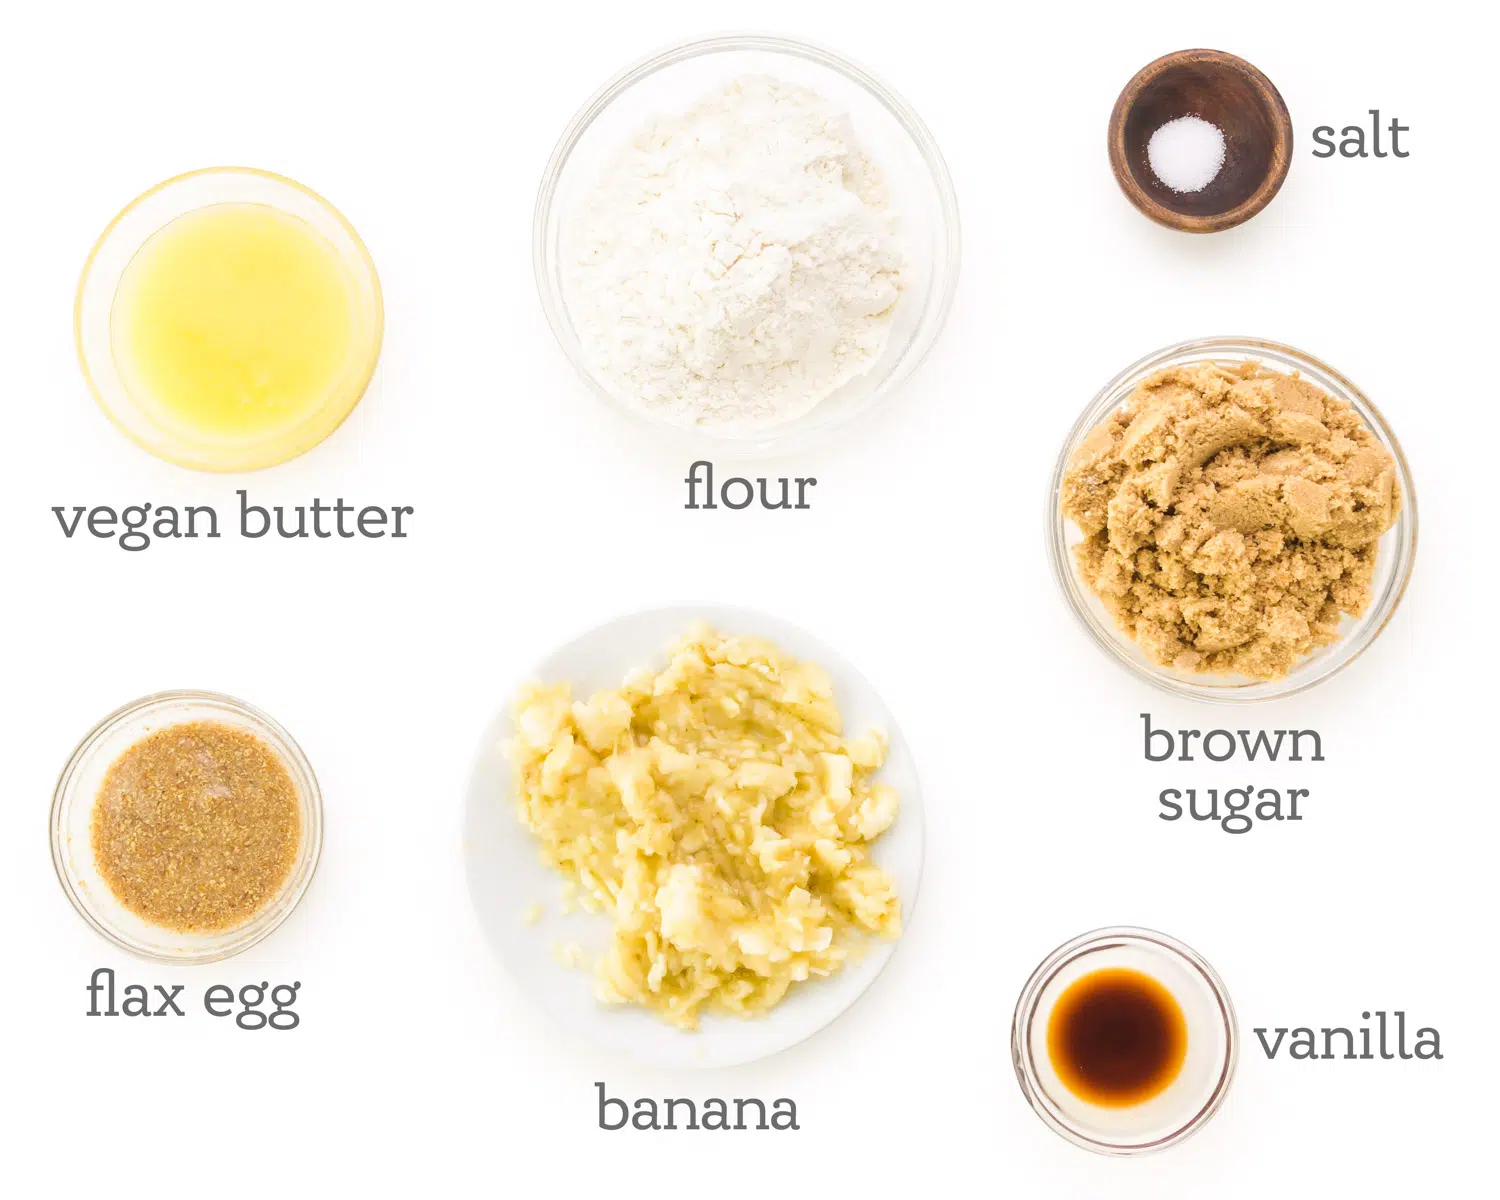 Ingredients are displayed on a table. The labels next to them read, salt, brown sugar, vanilla, banana, flax egg, vegan butter, and flour.